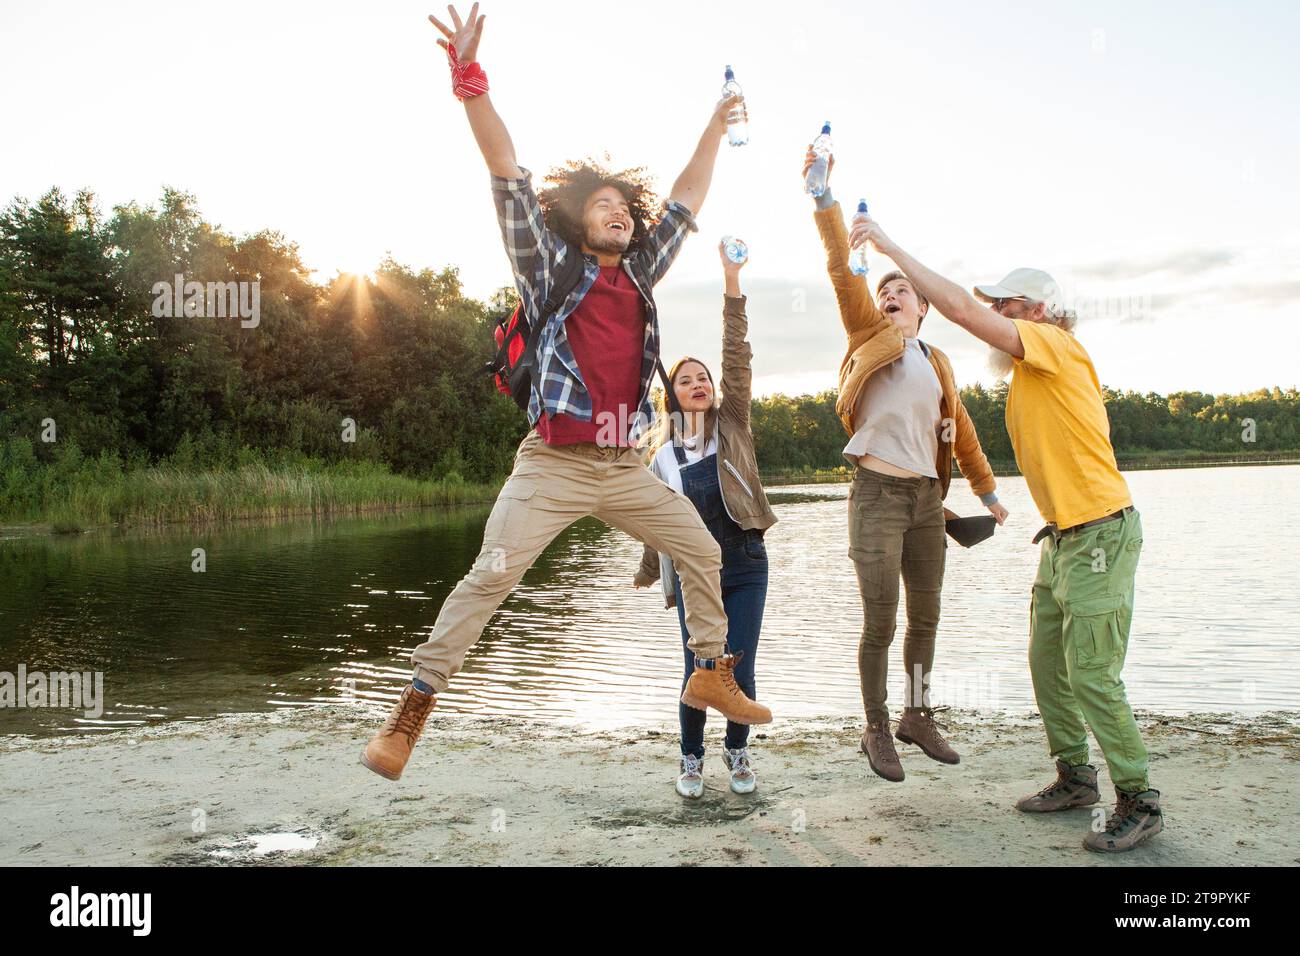 Capturing the essence of unbridled joy, this image features a group of friends in mid-celebration by the lake, one leaping high with arms and legs outstretched. Their faces are alive with laughter and excitement, each person caught in a moment of spontaneous delight. The setting sun casts a soft, golden light on the scene, reflecting off the water and adding a sense of warmth and vivacity to the carefree spirit of the gathering. Exuberant Joy by the Lakeside. High quality photo Stock Photo